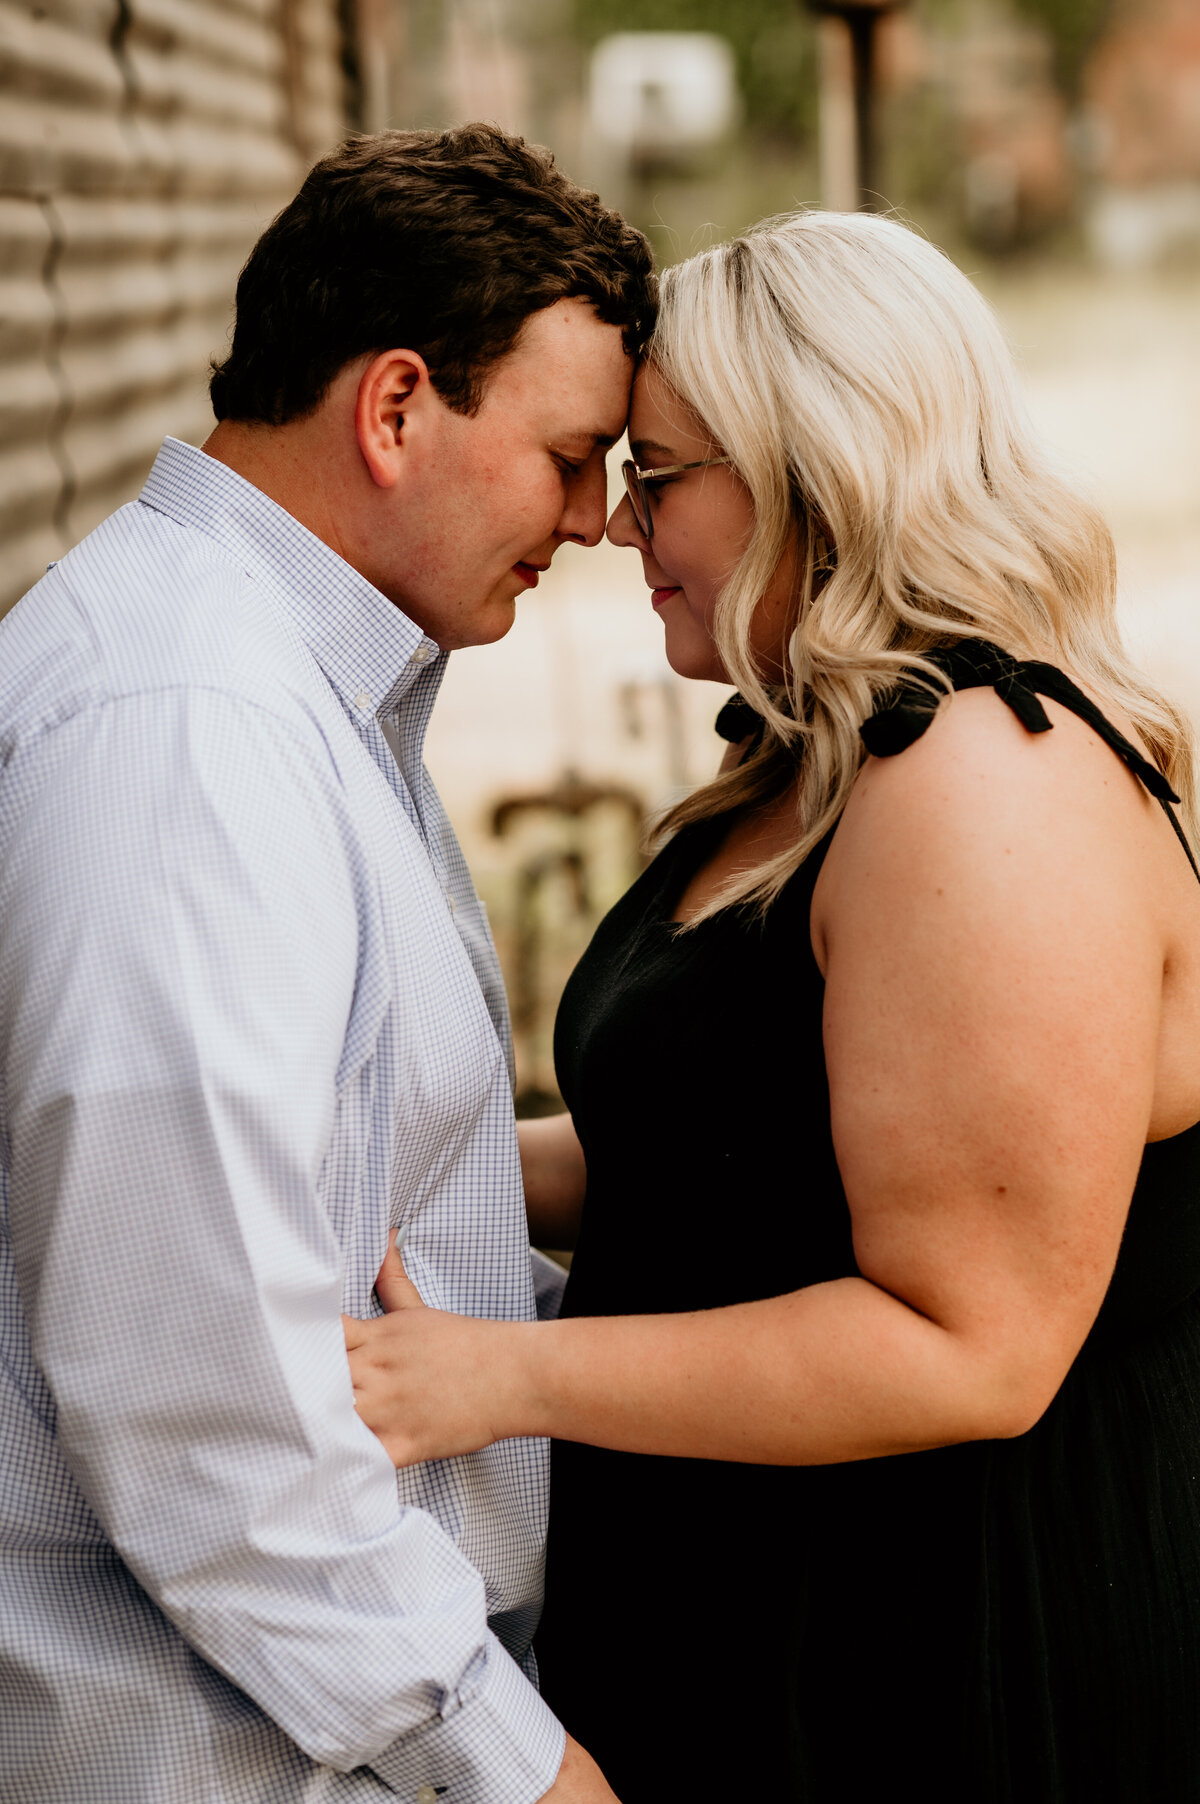 man and woman embraces each other as they rest their foreheads together and gently smile photographed by little rock engagement photographers